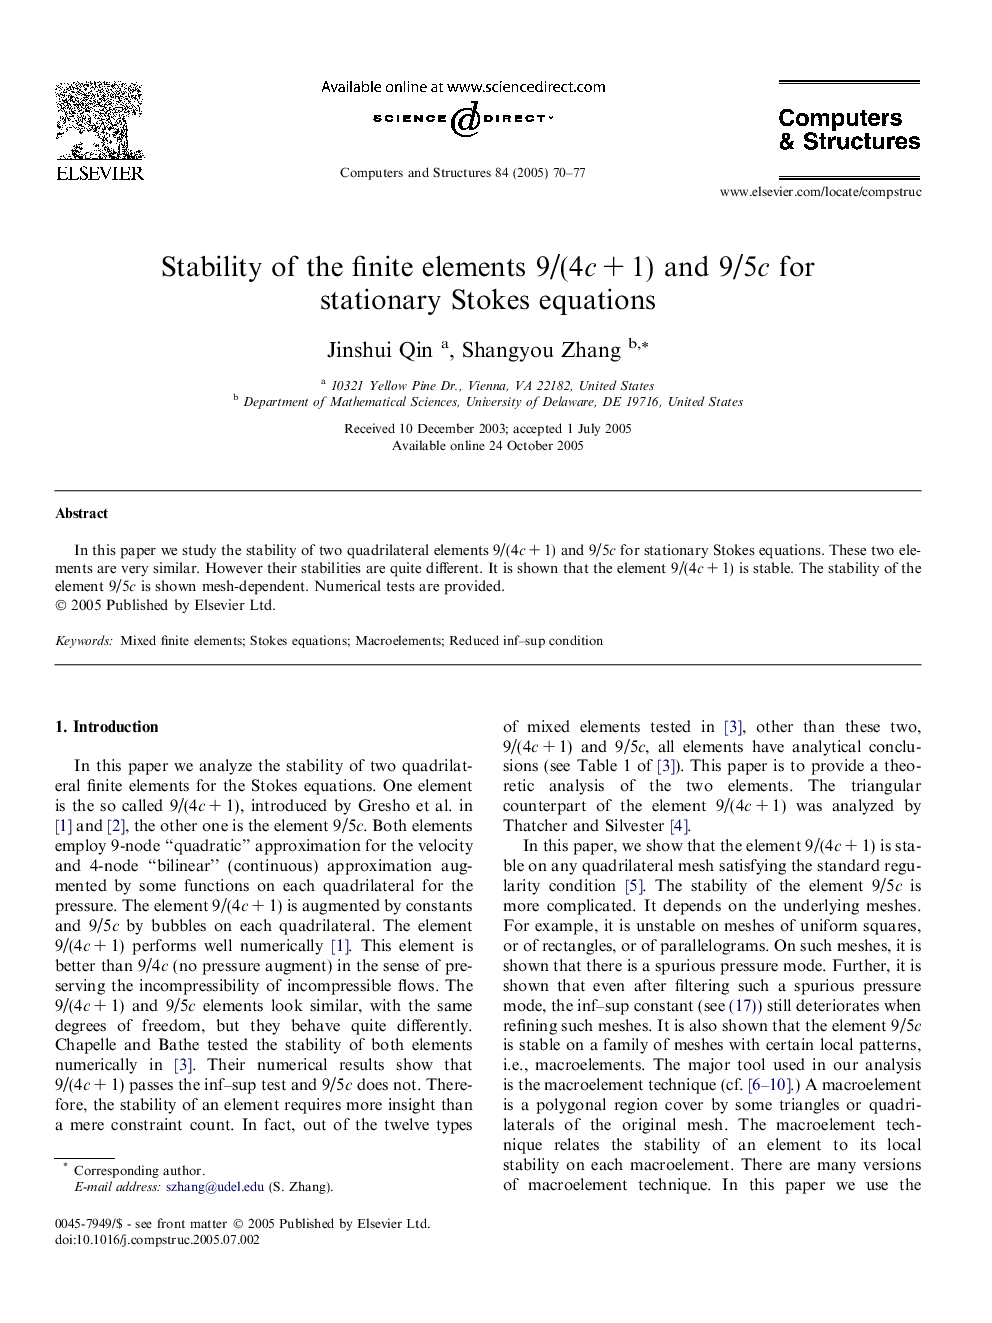 Stability of the finite elements 9/(4cÂ +Â 1) and 9/5c for stationary Stokes equations